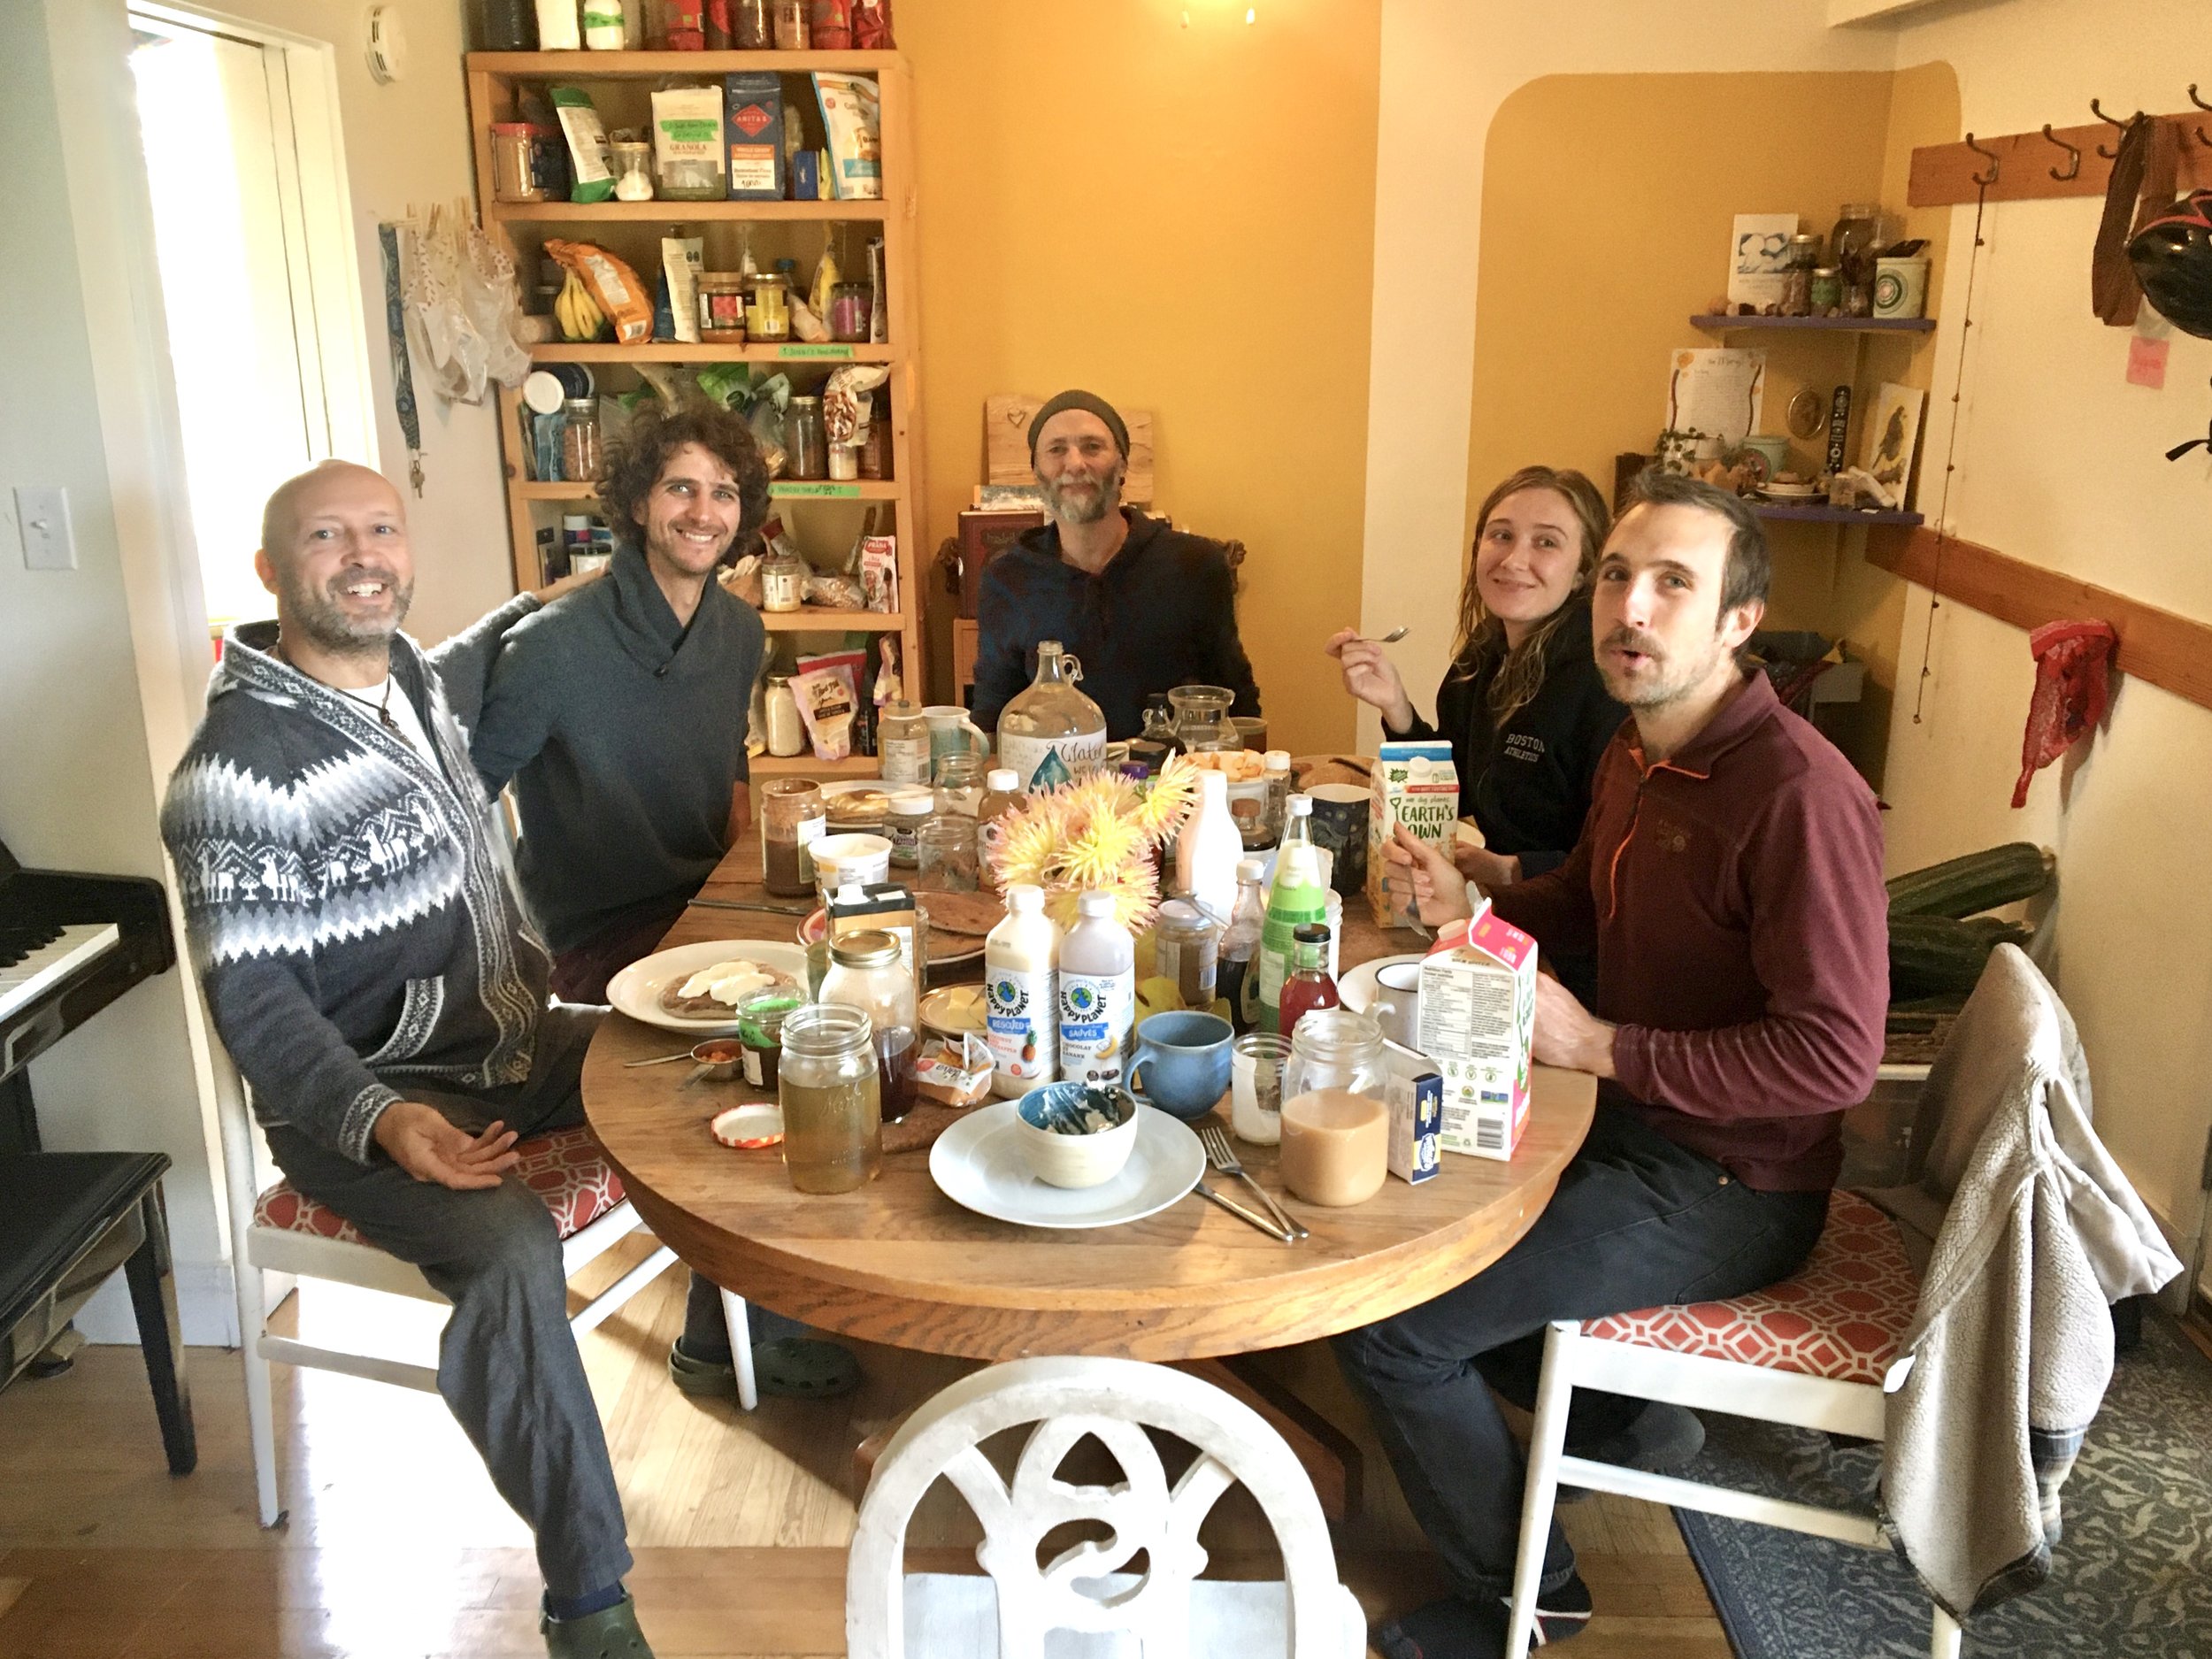 My beloved housemates for a birthday brunch